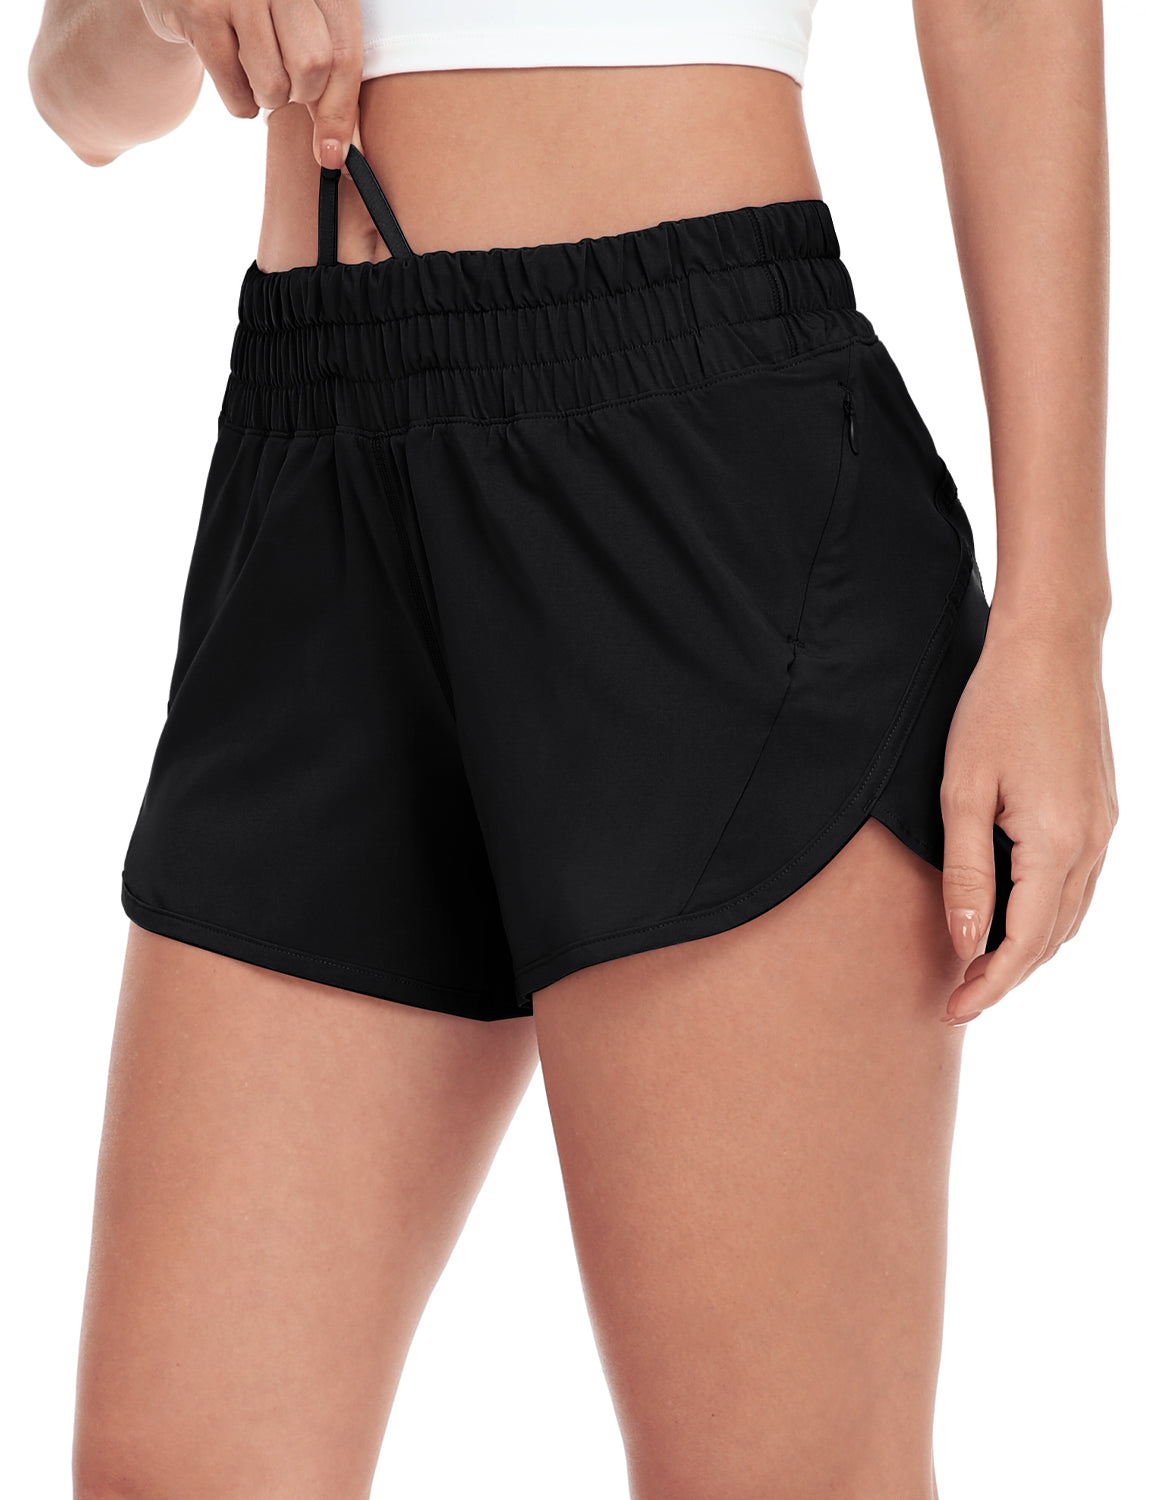  HeyNuts My Pace Running Shorts for Women, Mid Waisted